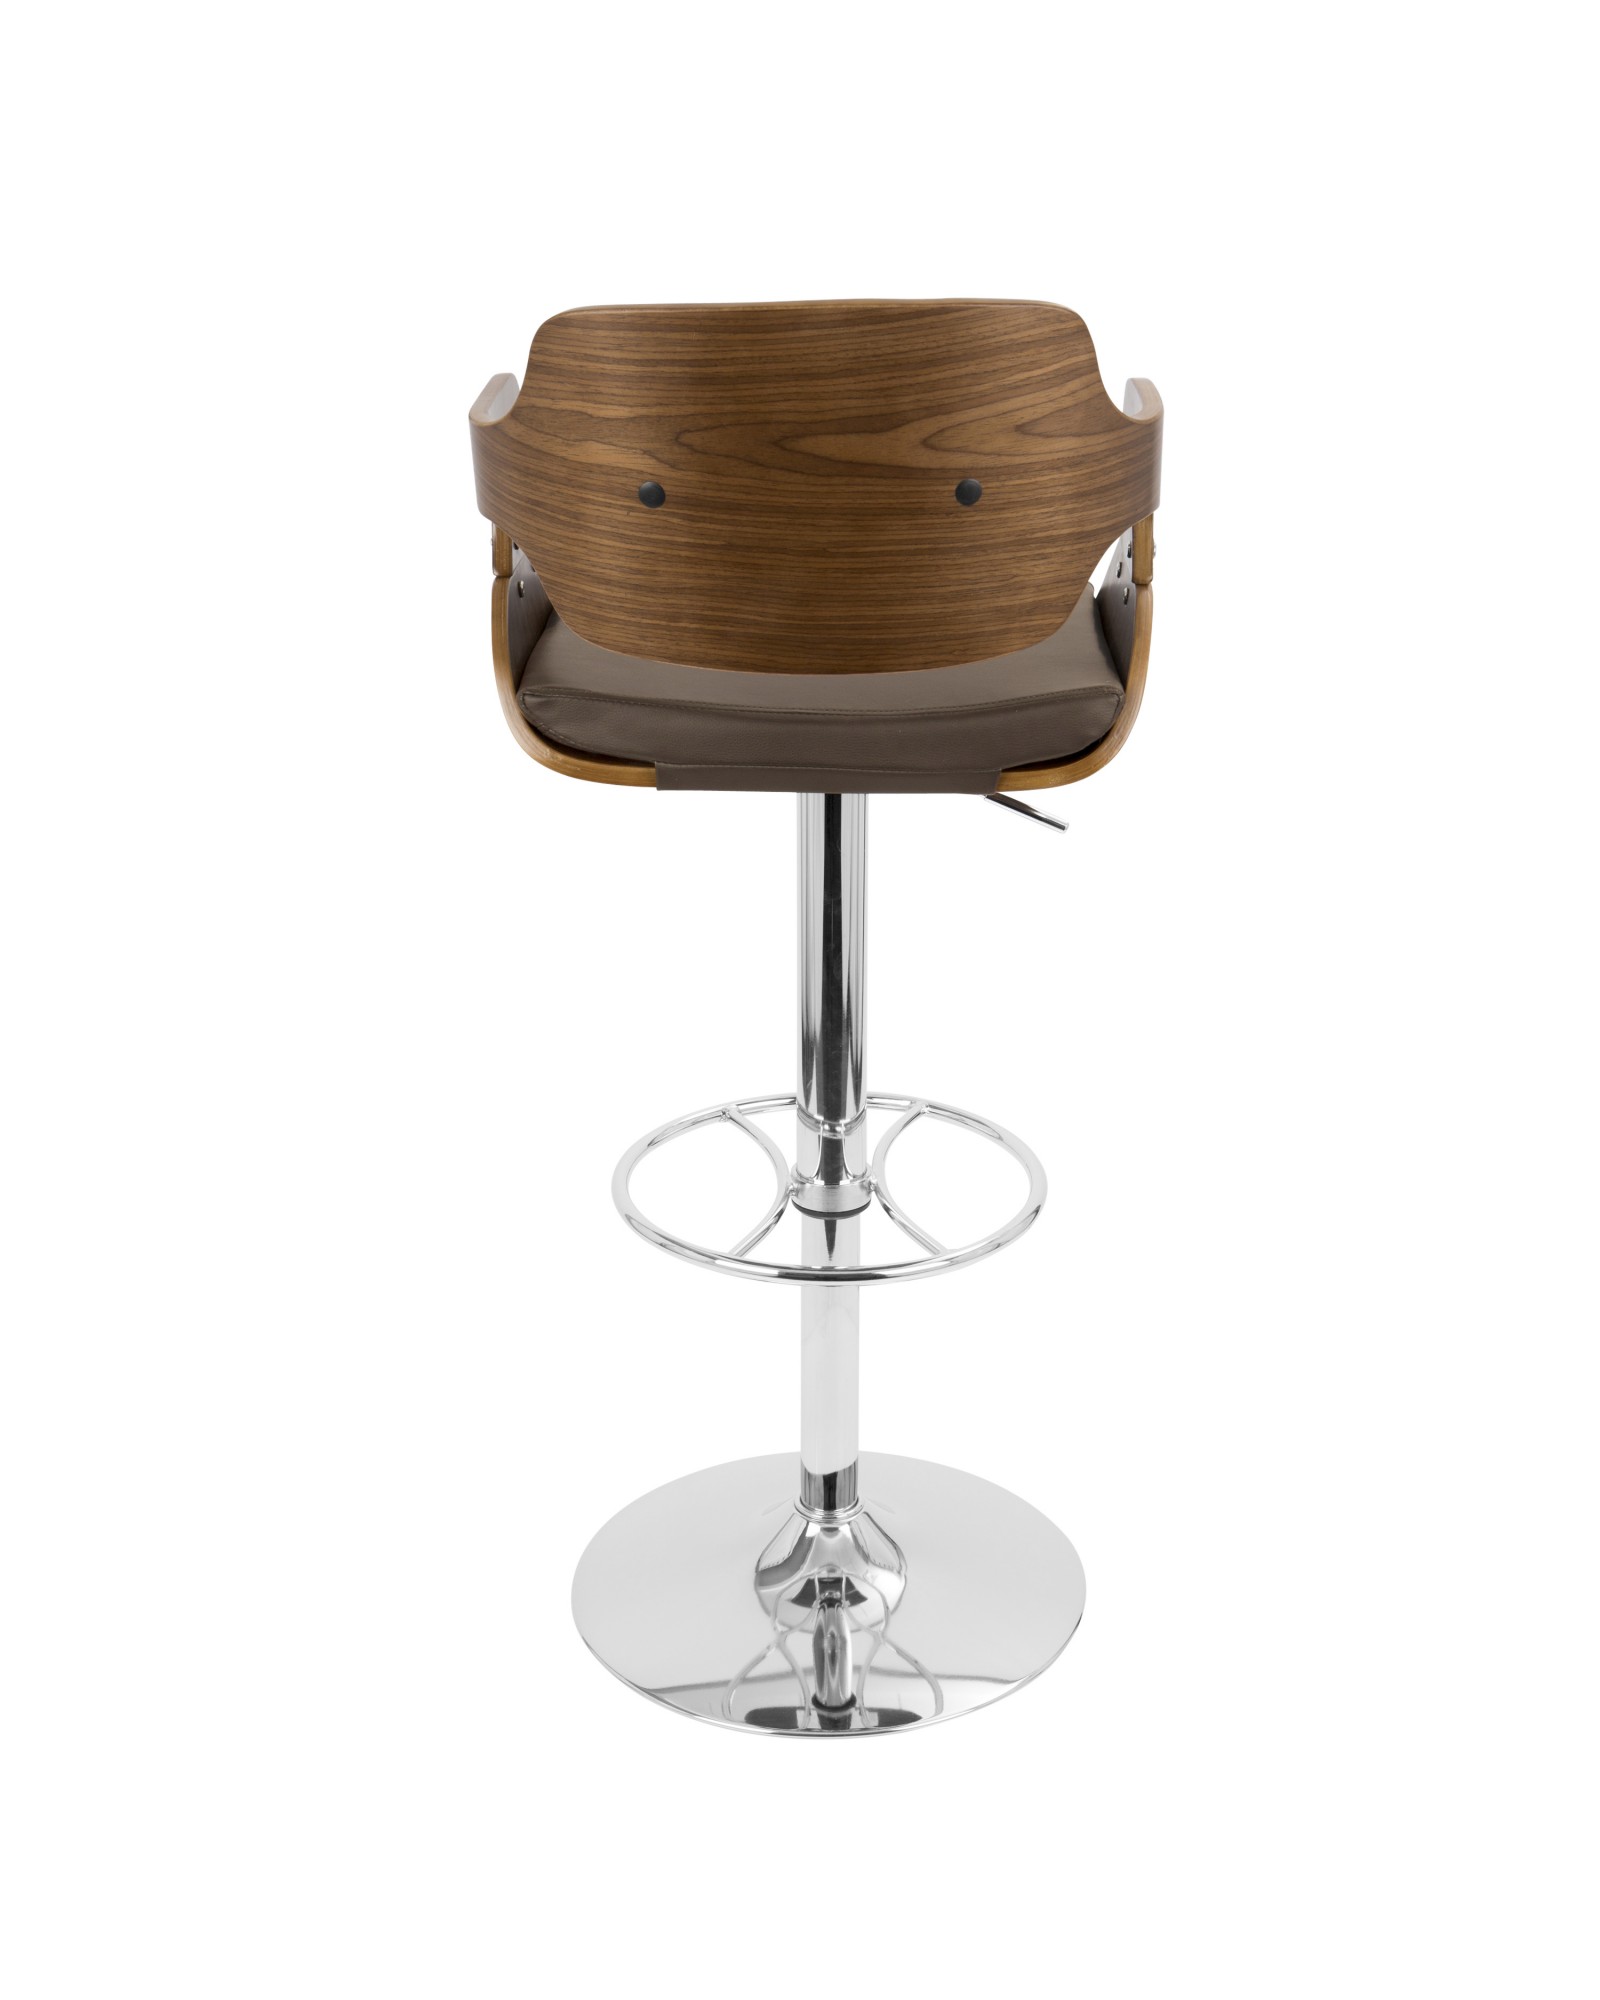 Fiore Height Adjustable Mid-century Modern Barstool with Swivel in Walnut and Brown